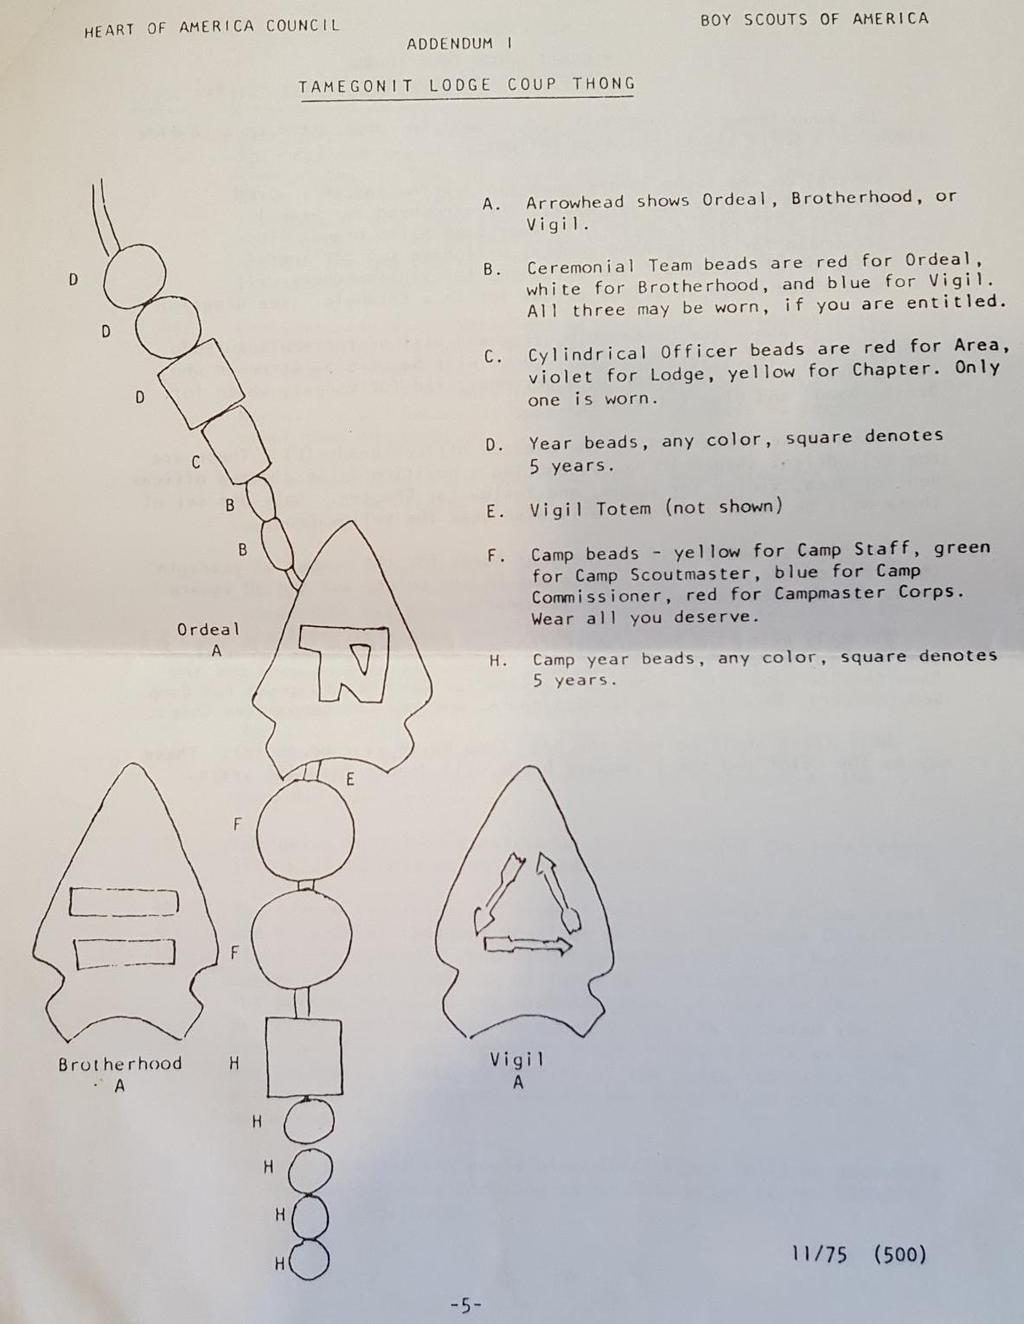 As discussed above, the 1971 coup thong instructions reference the use of a small personal totem to be worn below the arrow. In many cases these totems corresponded to the member s Vigil name.